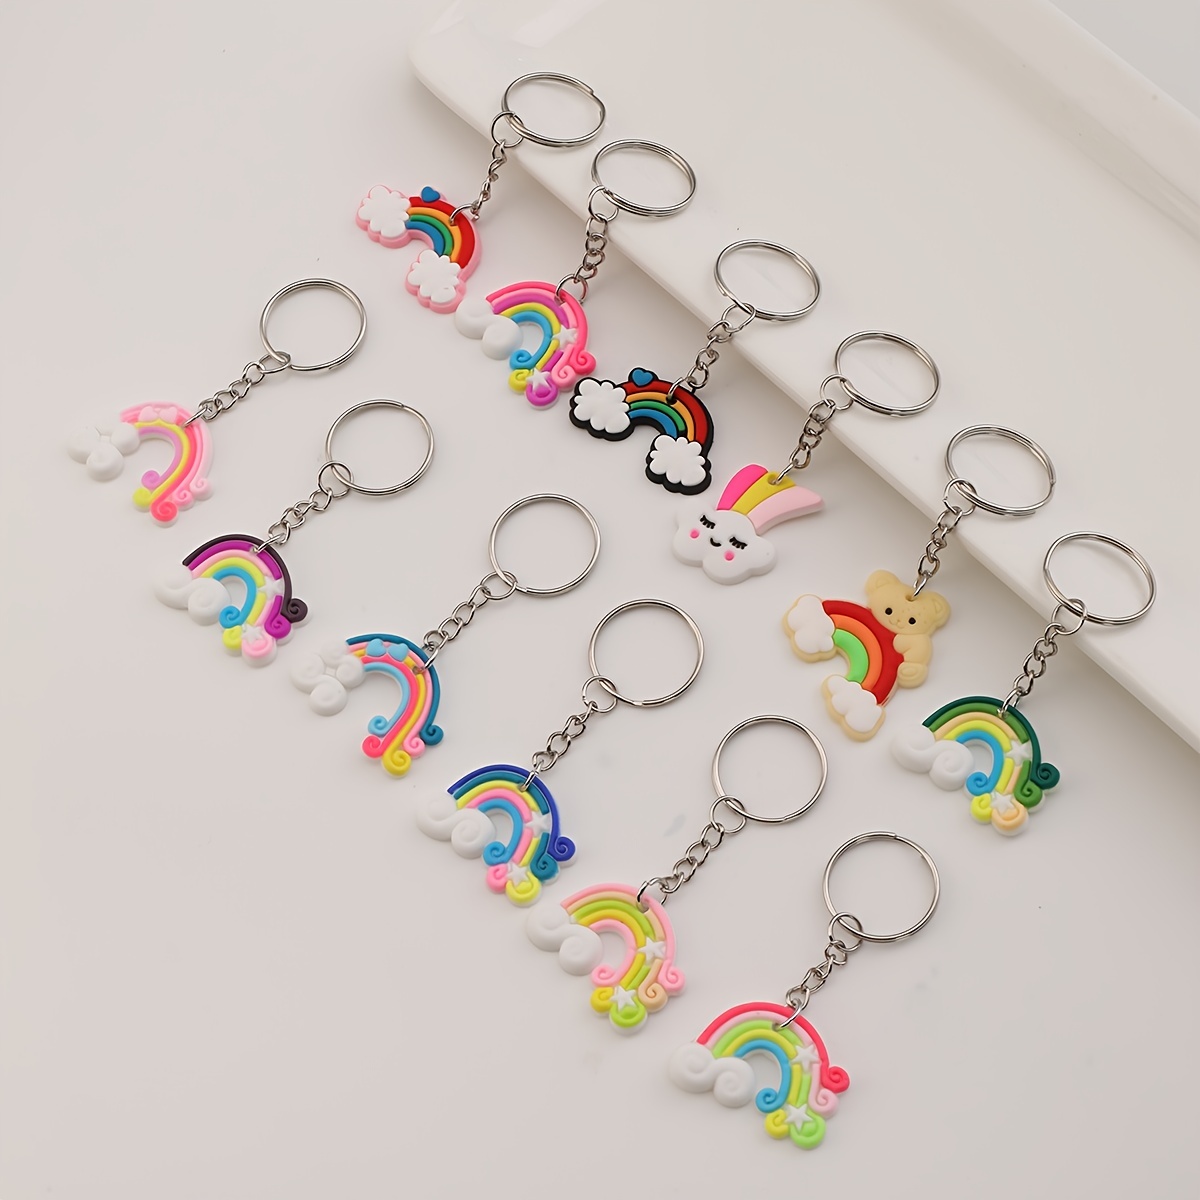 12pcs PVC Silicone Rainbow Keychain Bag Charm for Birthday Party Favor Supplies